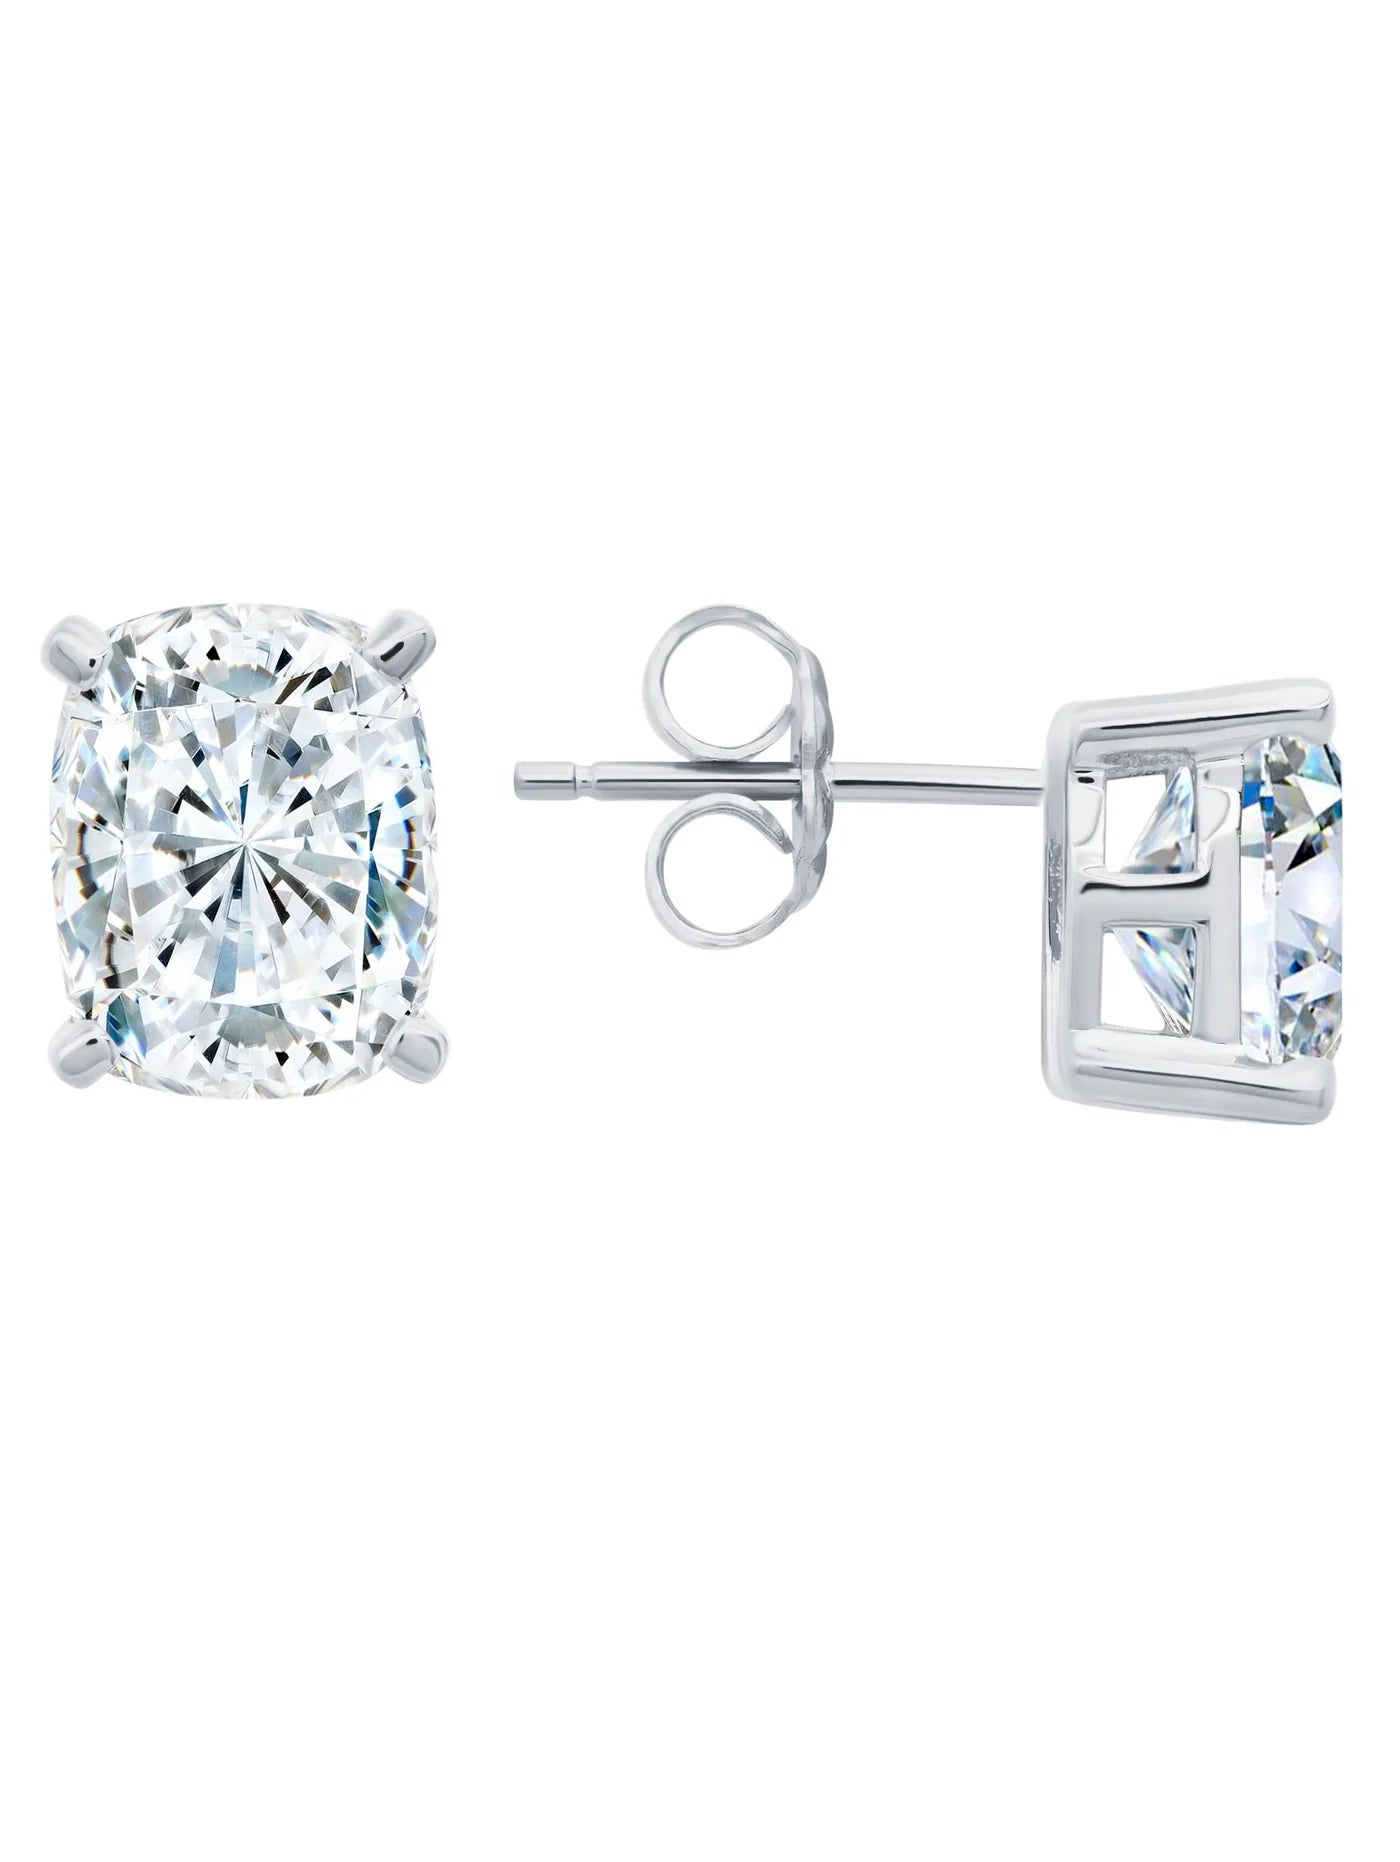 Radiant Cushion Cut Earrings Finished in Pure Platinum